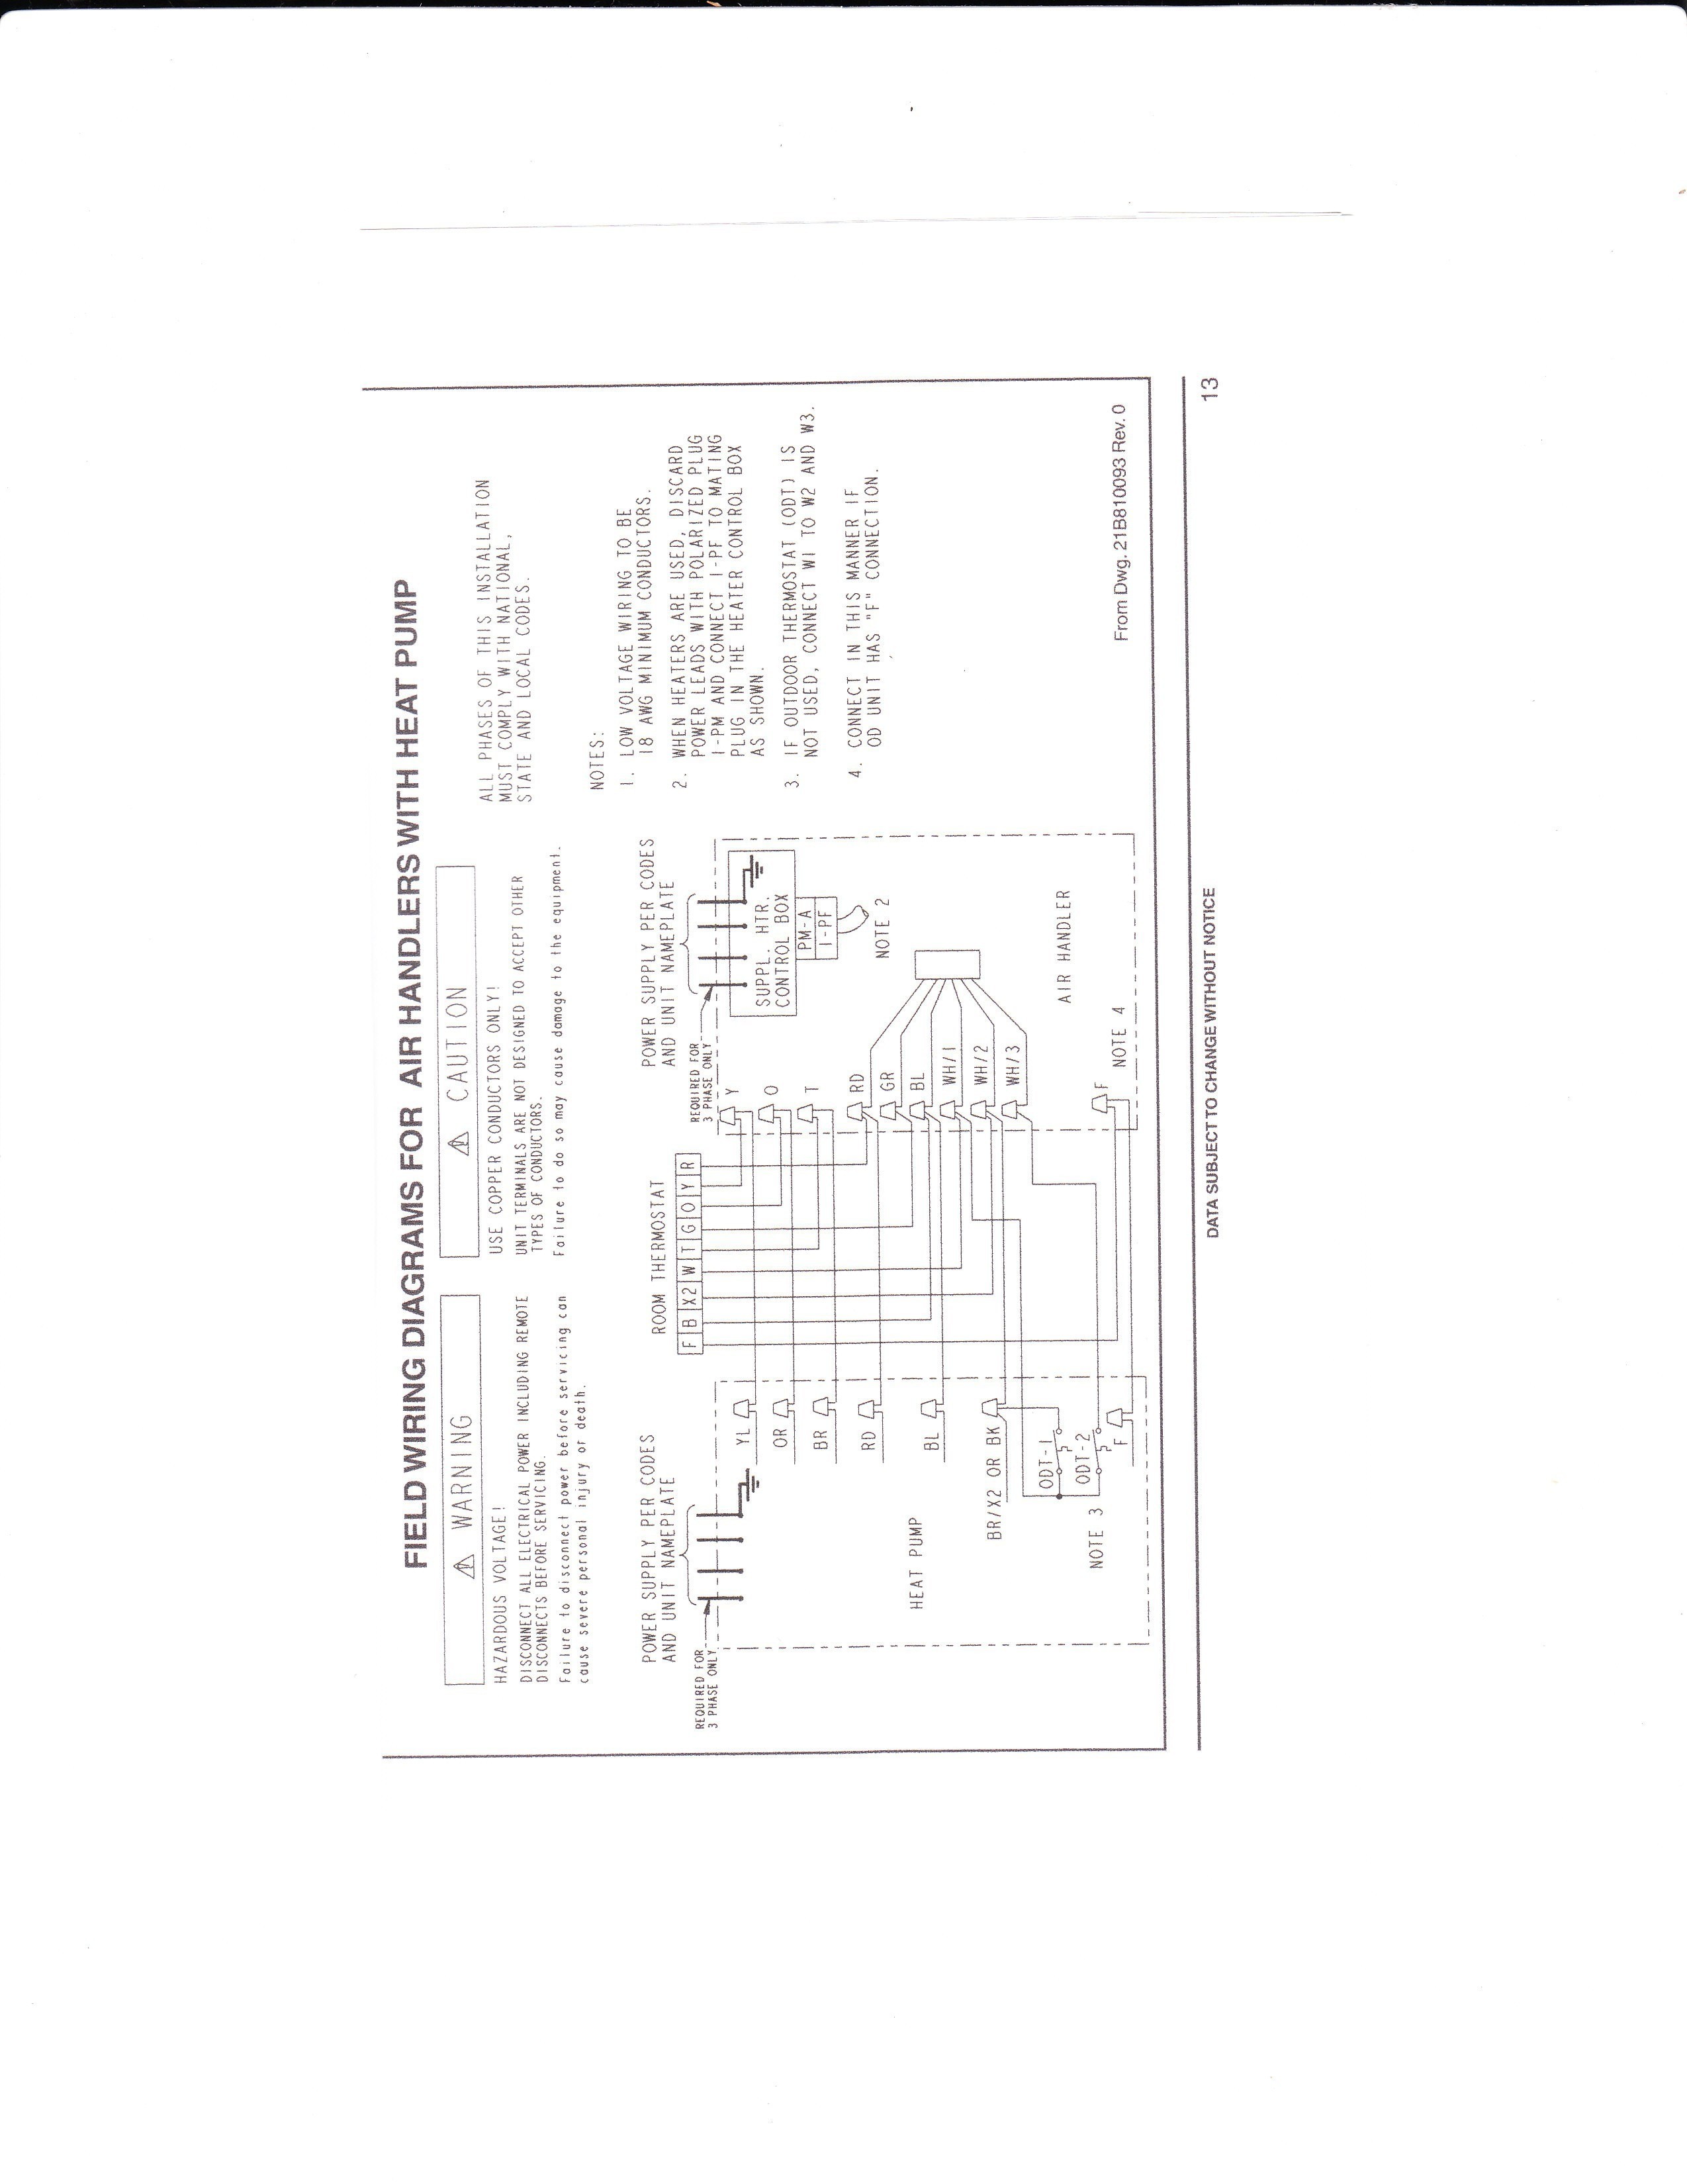 Wiring Diagram For Ac Disconnect Valid Ac Disconnect Wiring Diagram